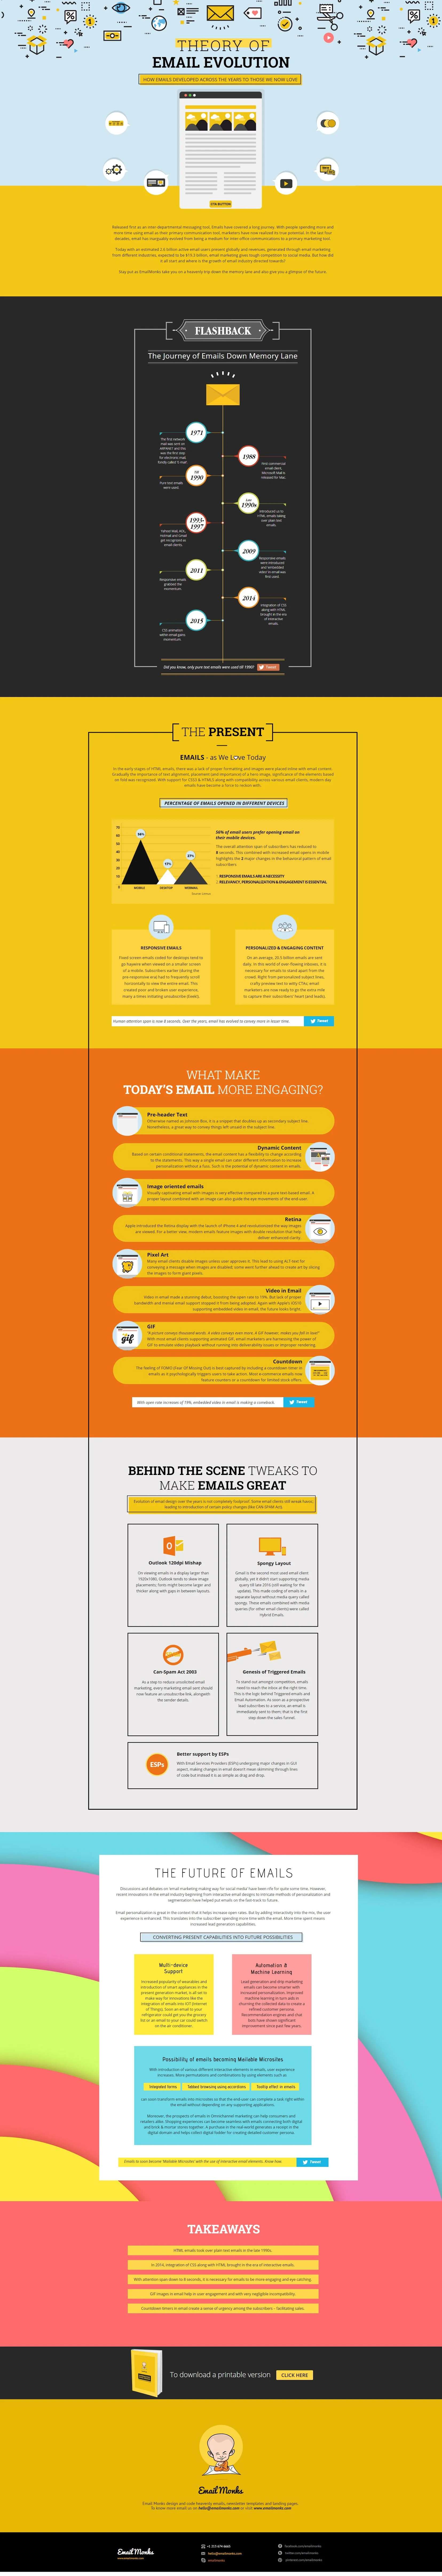 The Theory of Email Evolution - #Infographic